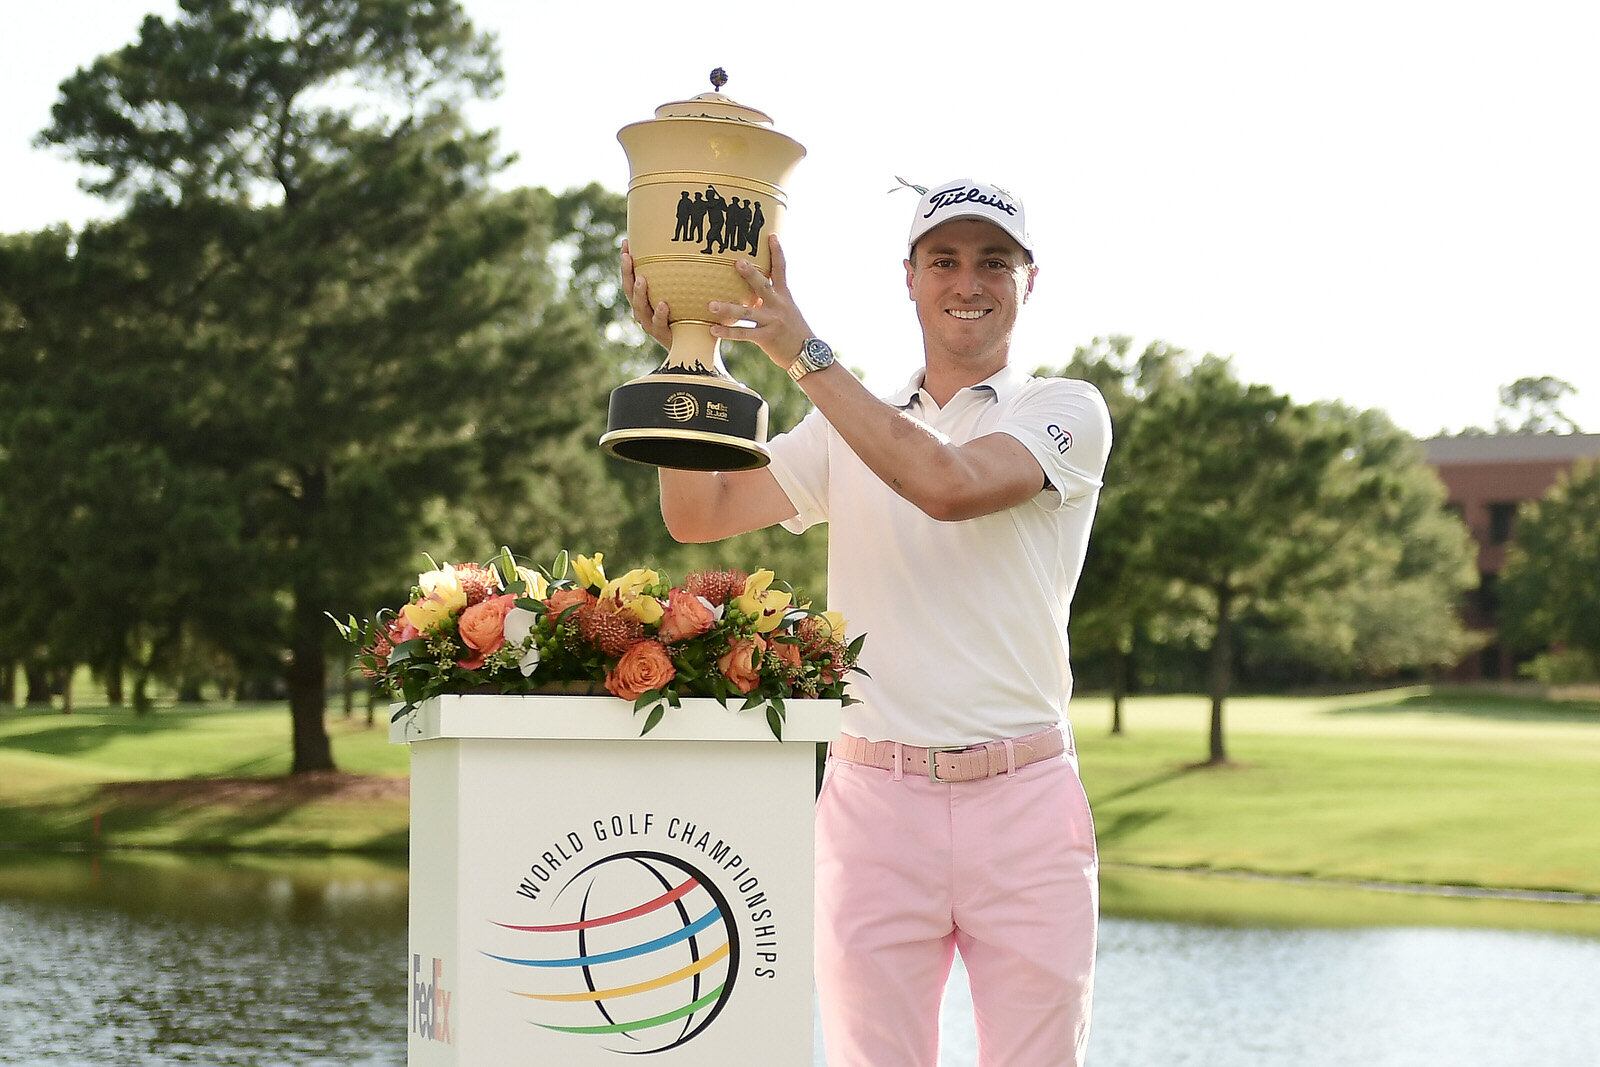  MEMPHIS, TENNESSEE - AUGUST 02:  Justin Thomas of the United States poses with the trophy after winning the World Golf Championship FedEx St Jude Invitational at TPC Southwind on August 02, 2020 in Memphis, Tennessee. (Photo by Stacy Revere/Getty Im